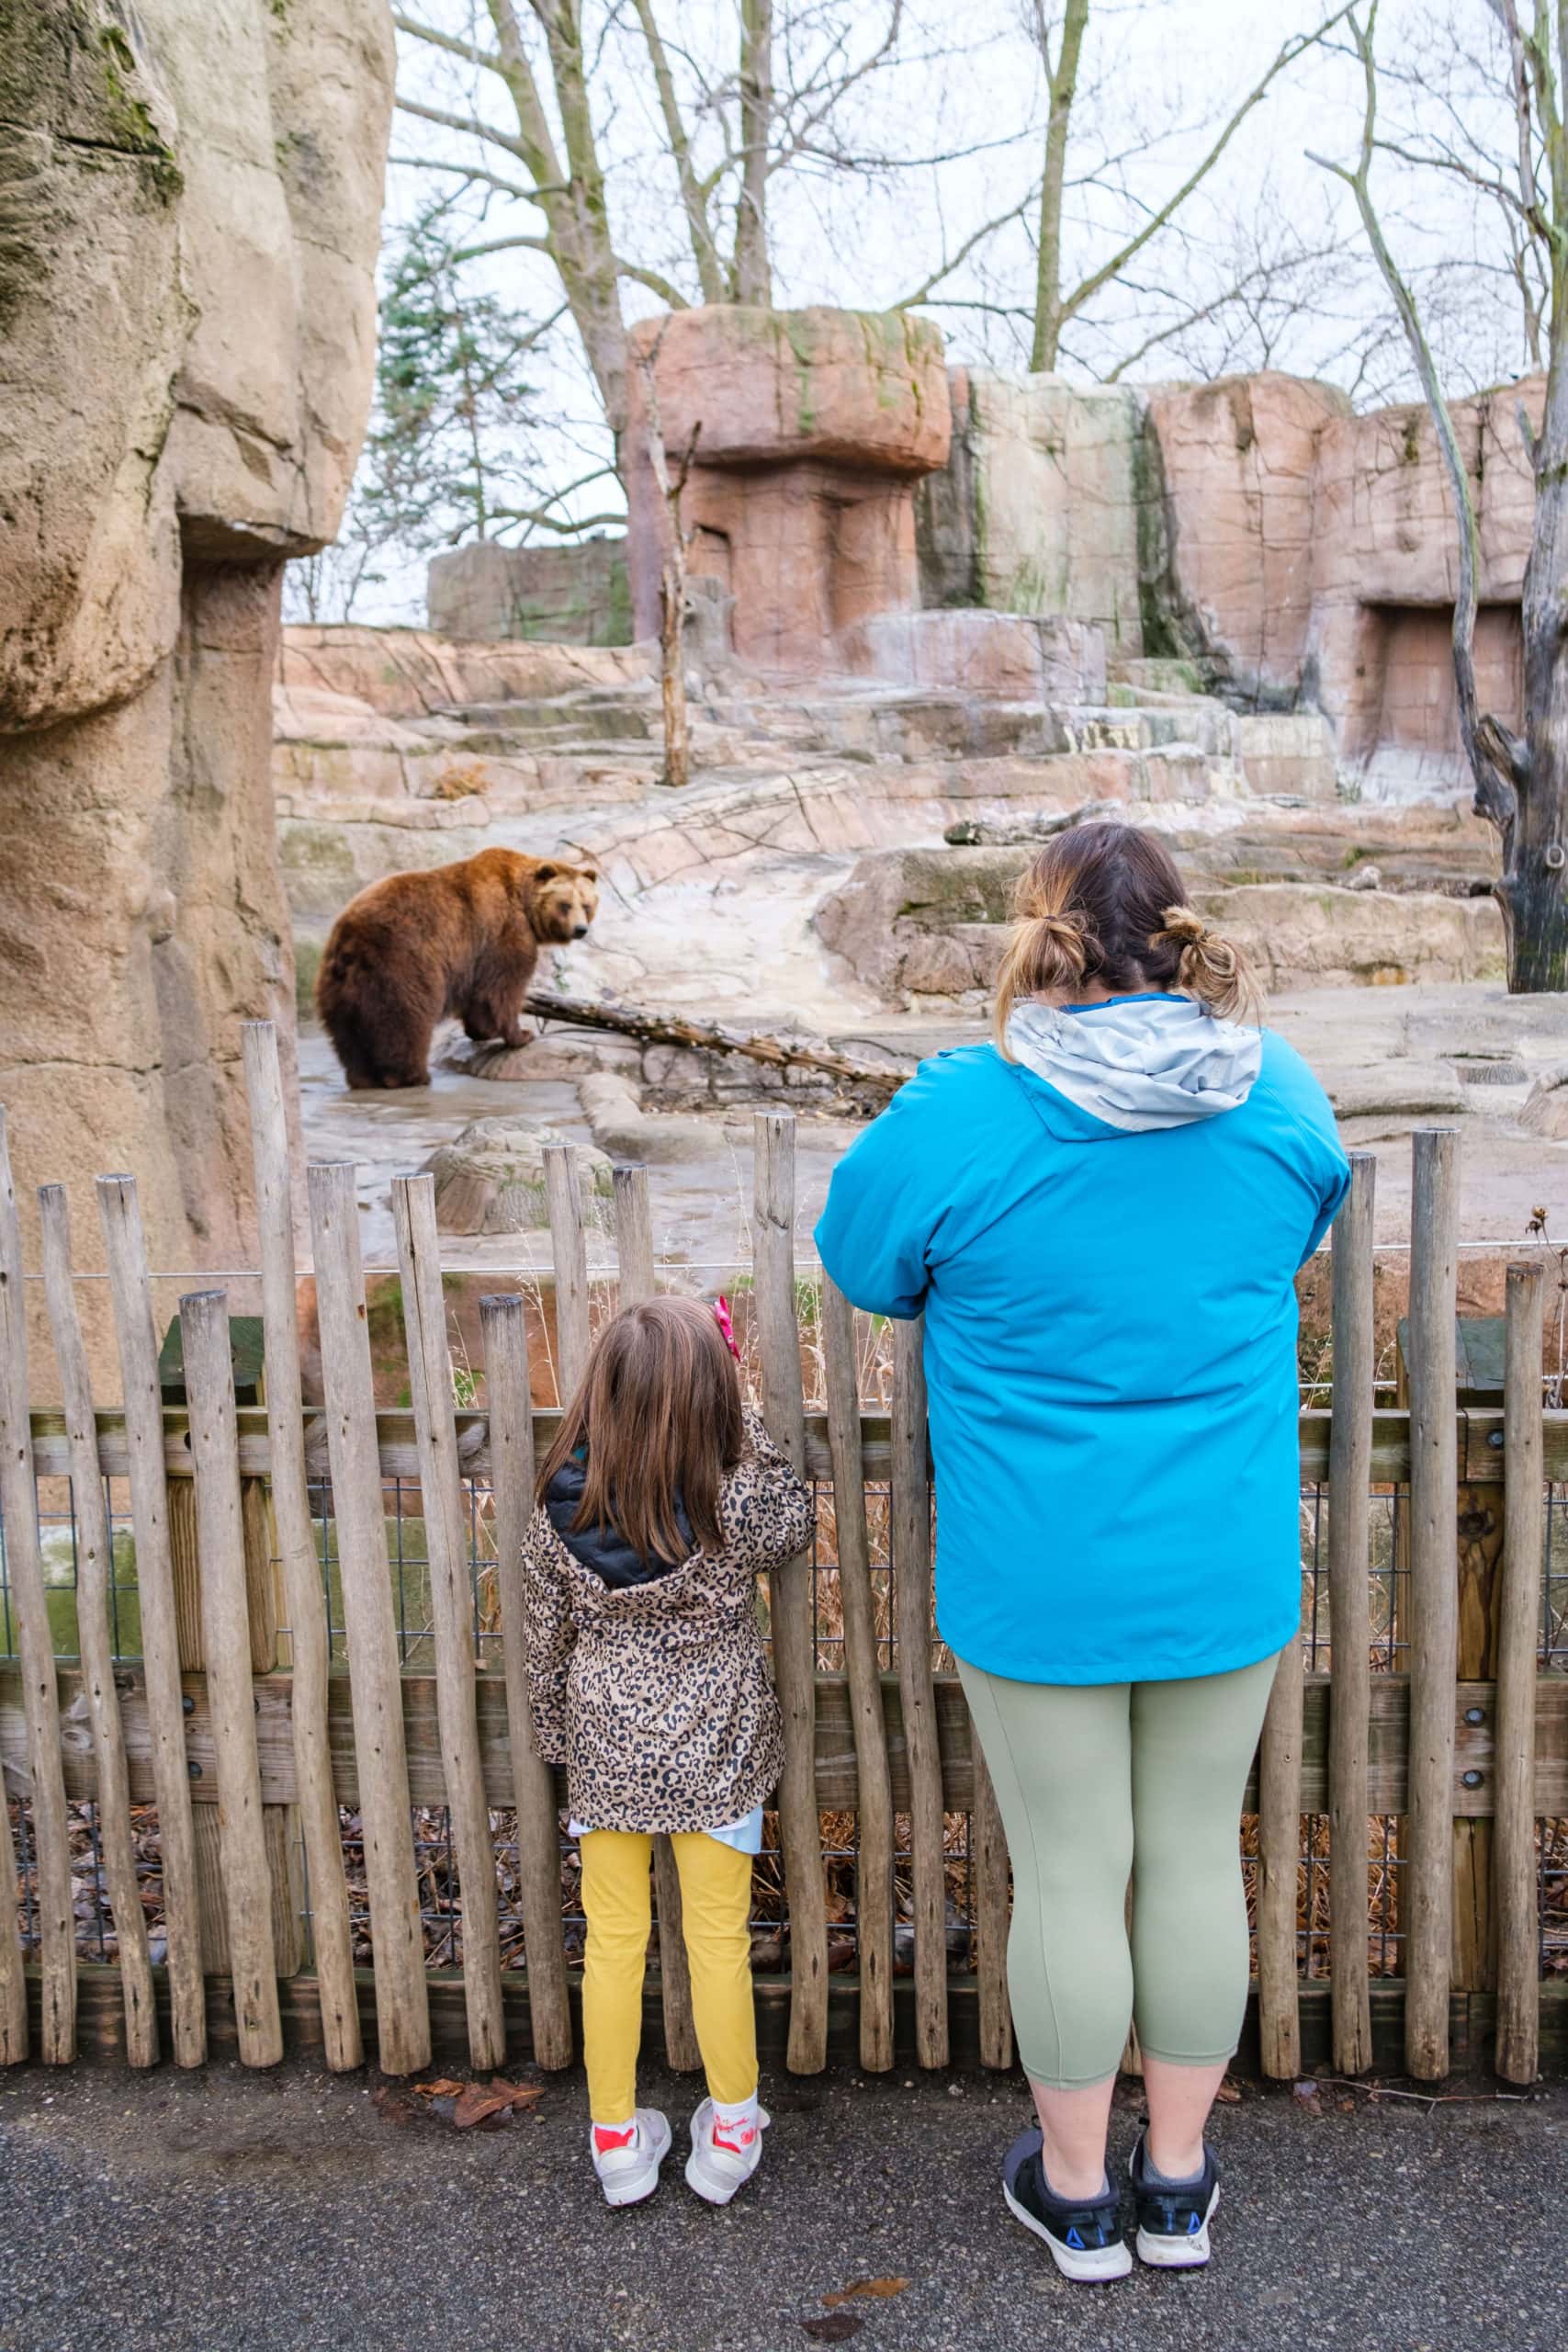 Mother and daughter looking at brown bear inside the Indianapolis Zoo.